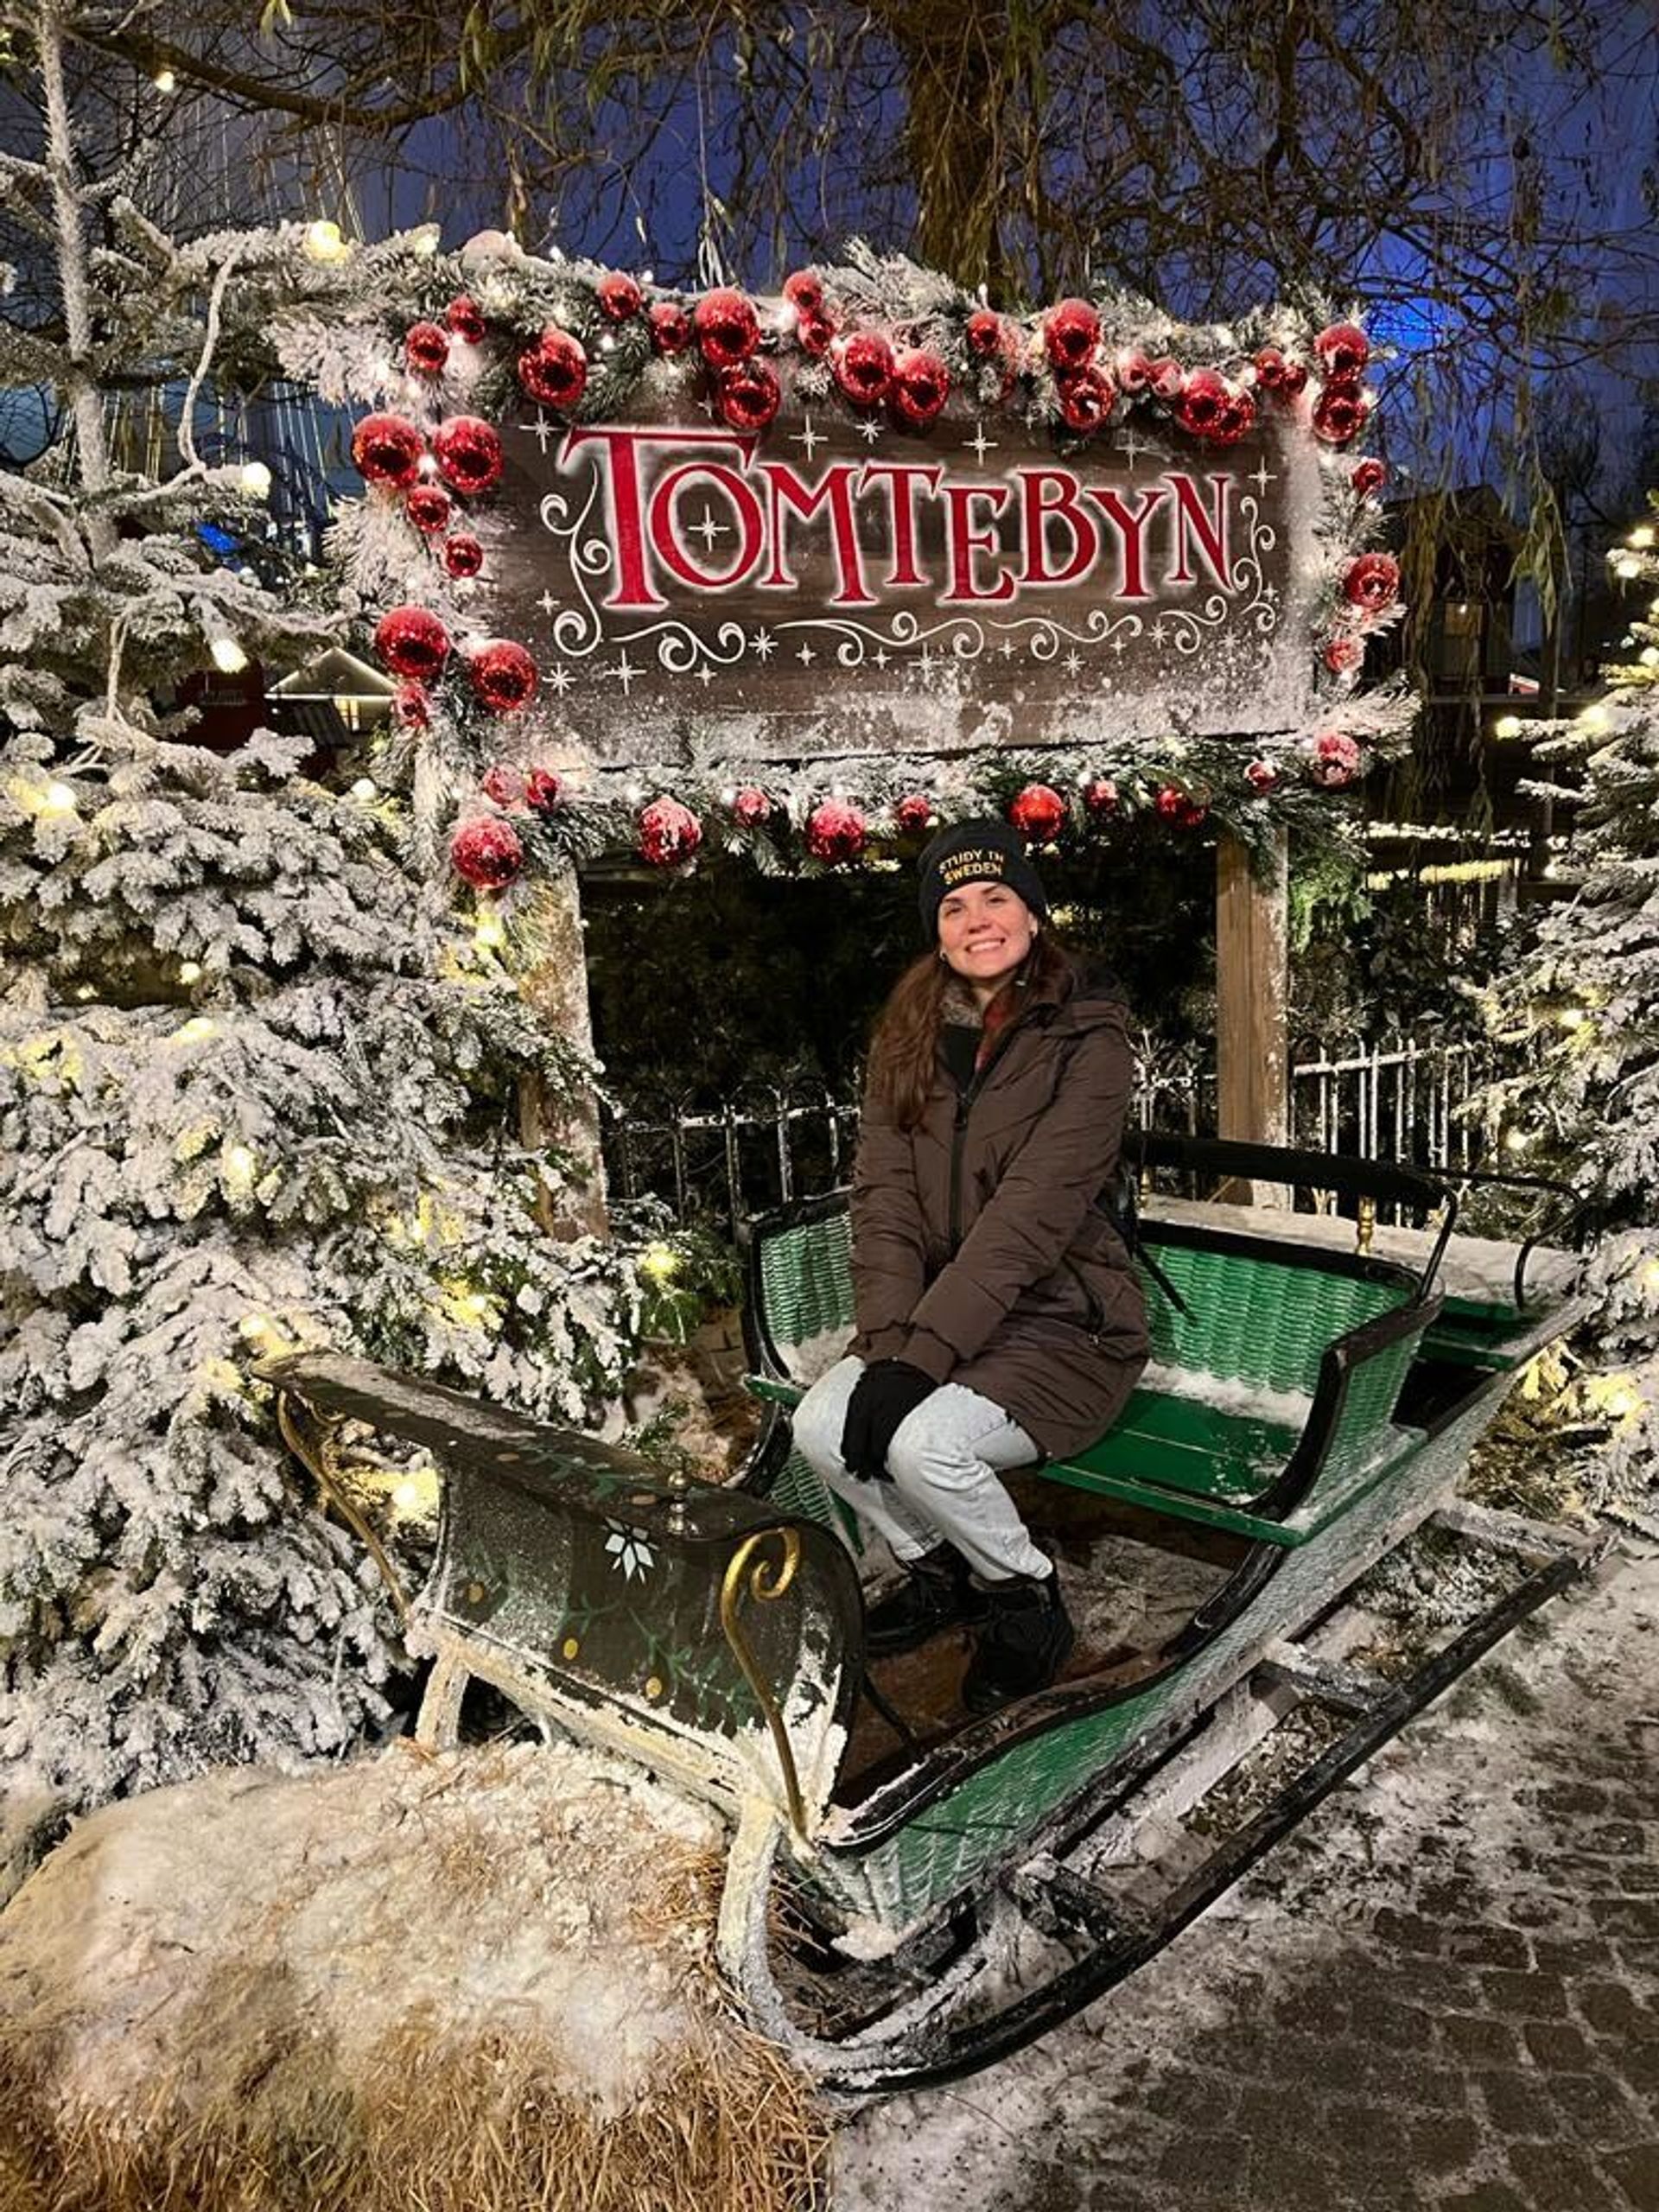 A woman sits in a sleigh beneath a festively decorated 'Tomtebyn' sign.